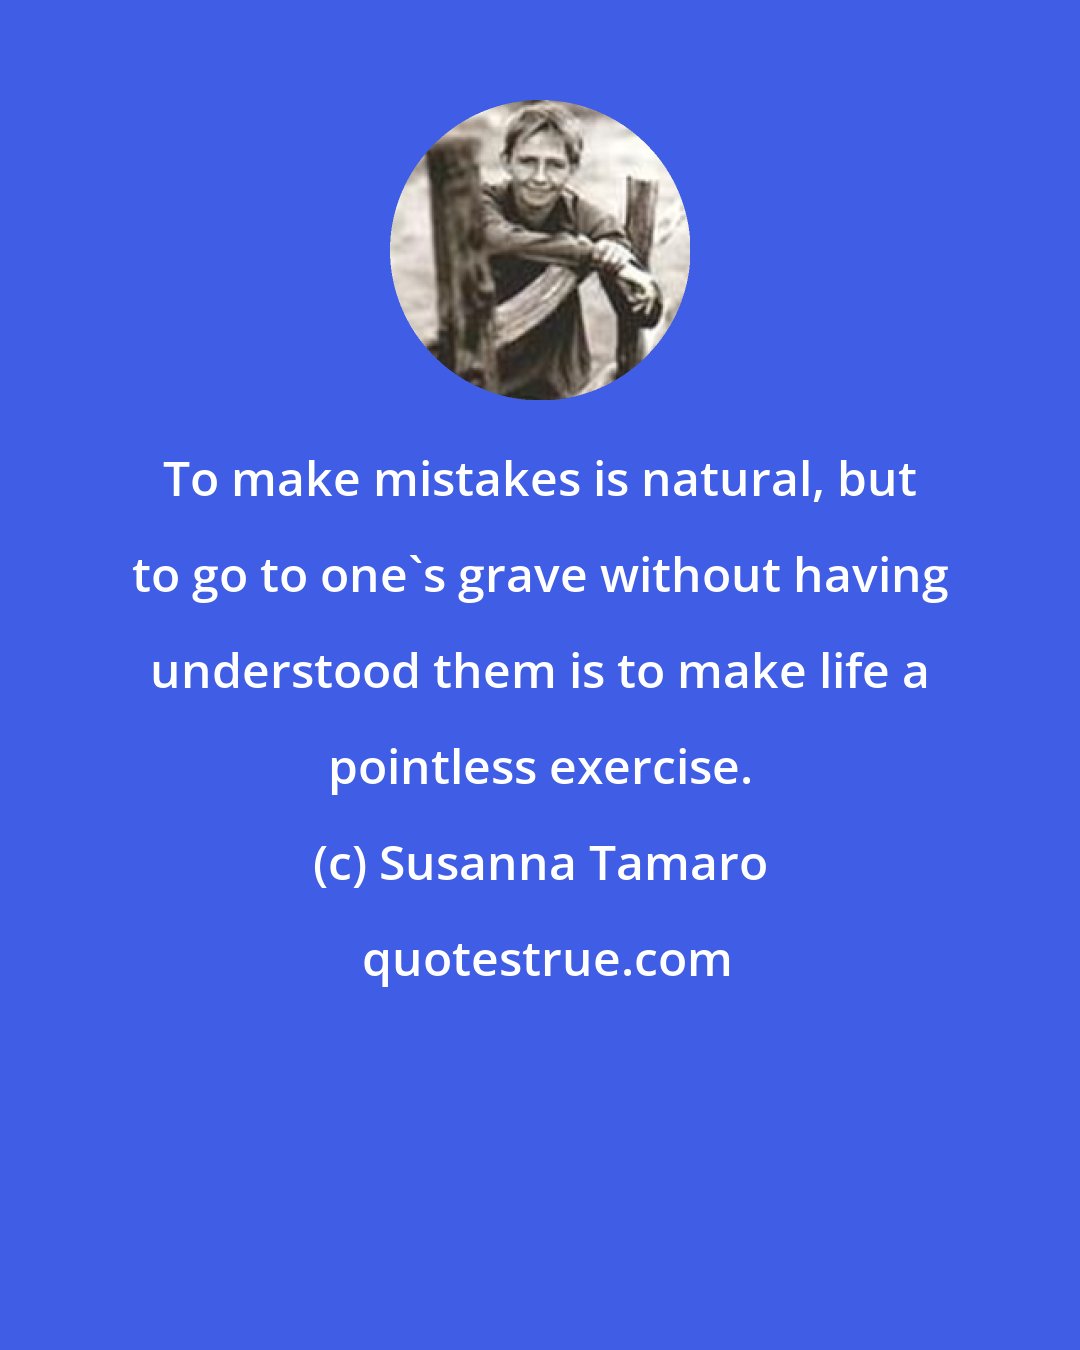 Susanna Tamaro: To make mistakes is natural, but to go to one's grave without having understood them is to make life a pointless exercise.